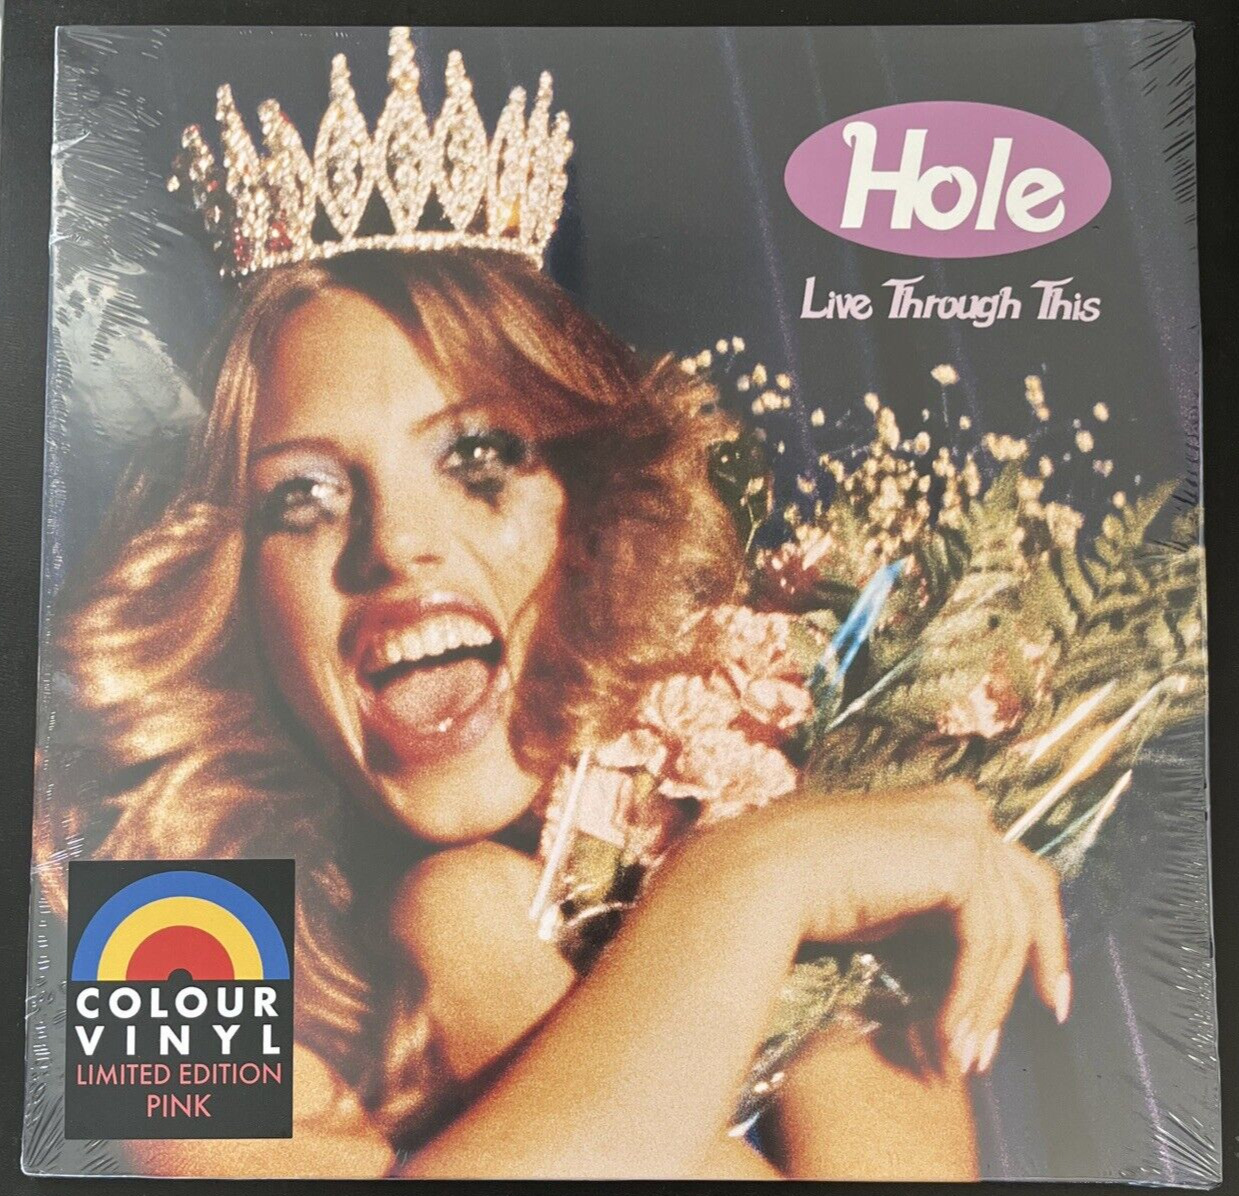 HOLE LIVE THROUGH THIS PINK COLORED VINYL LP LIMITED EDITION SEALED MINT